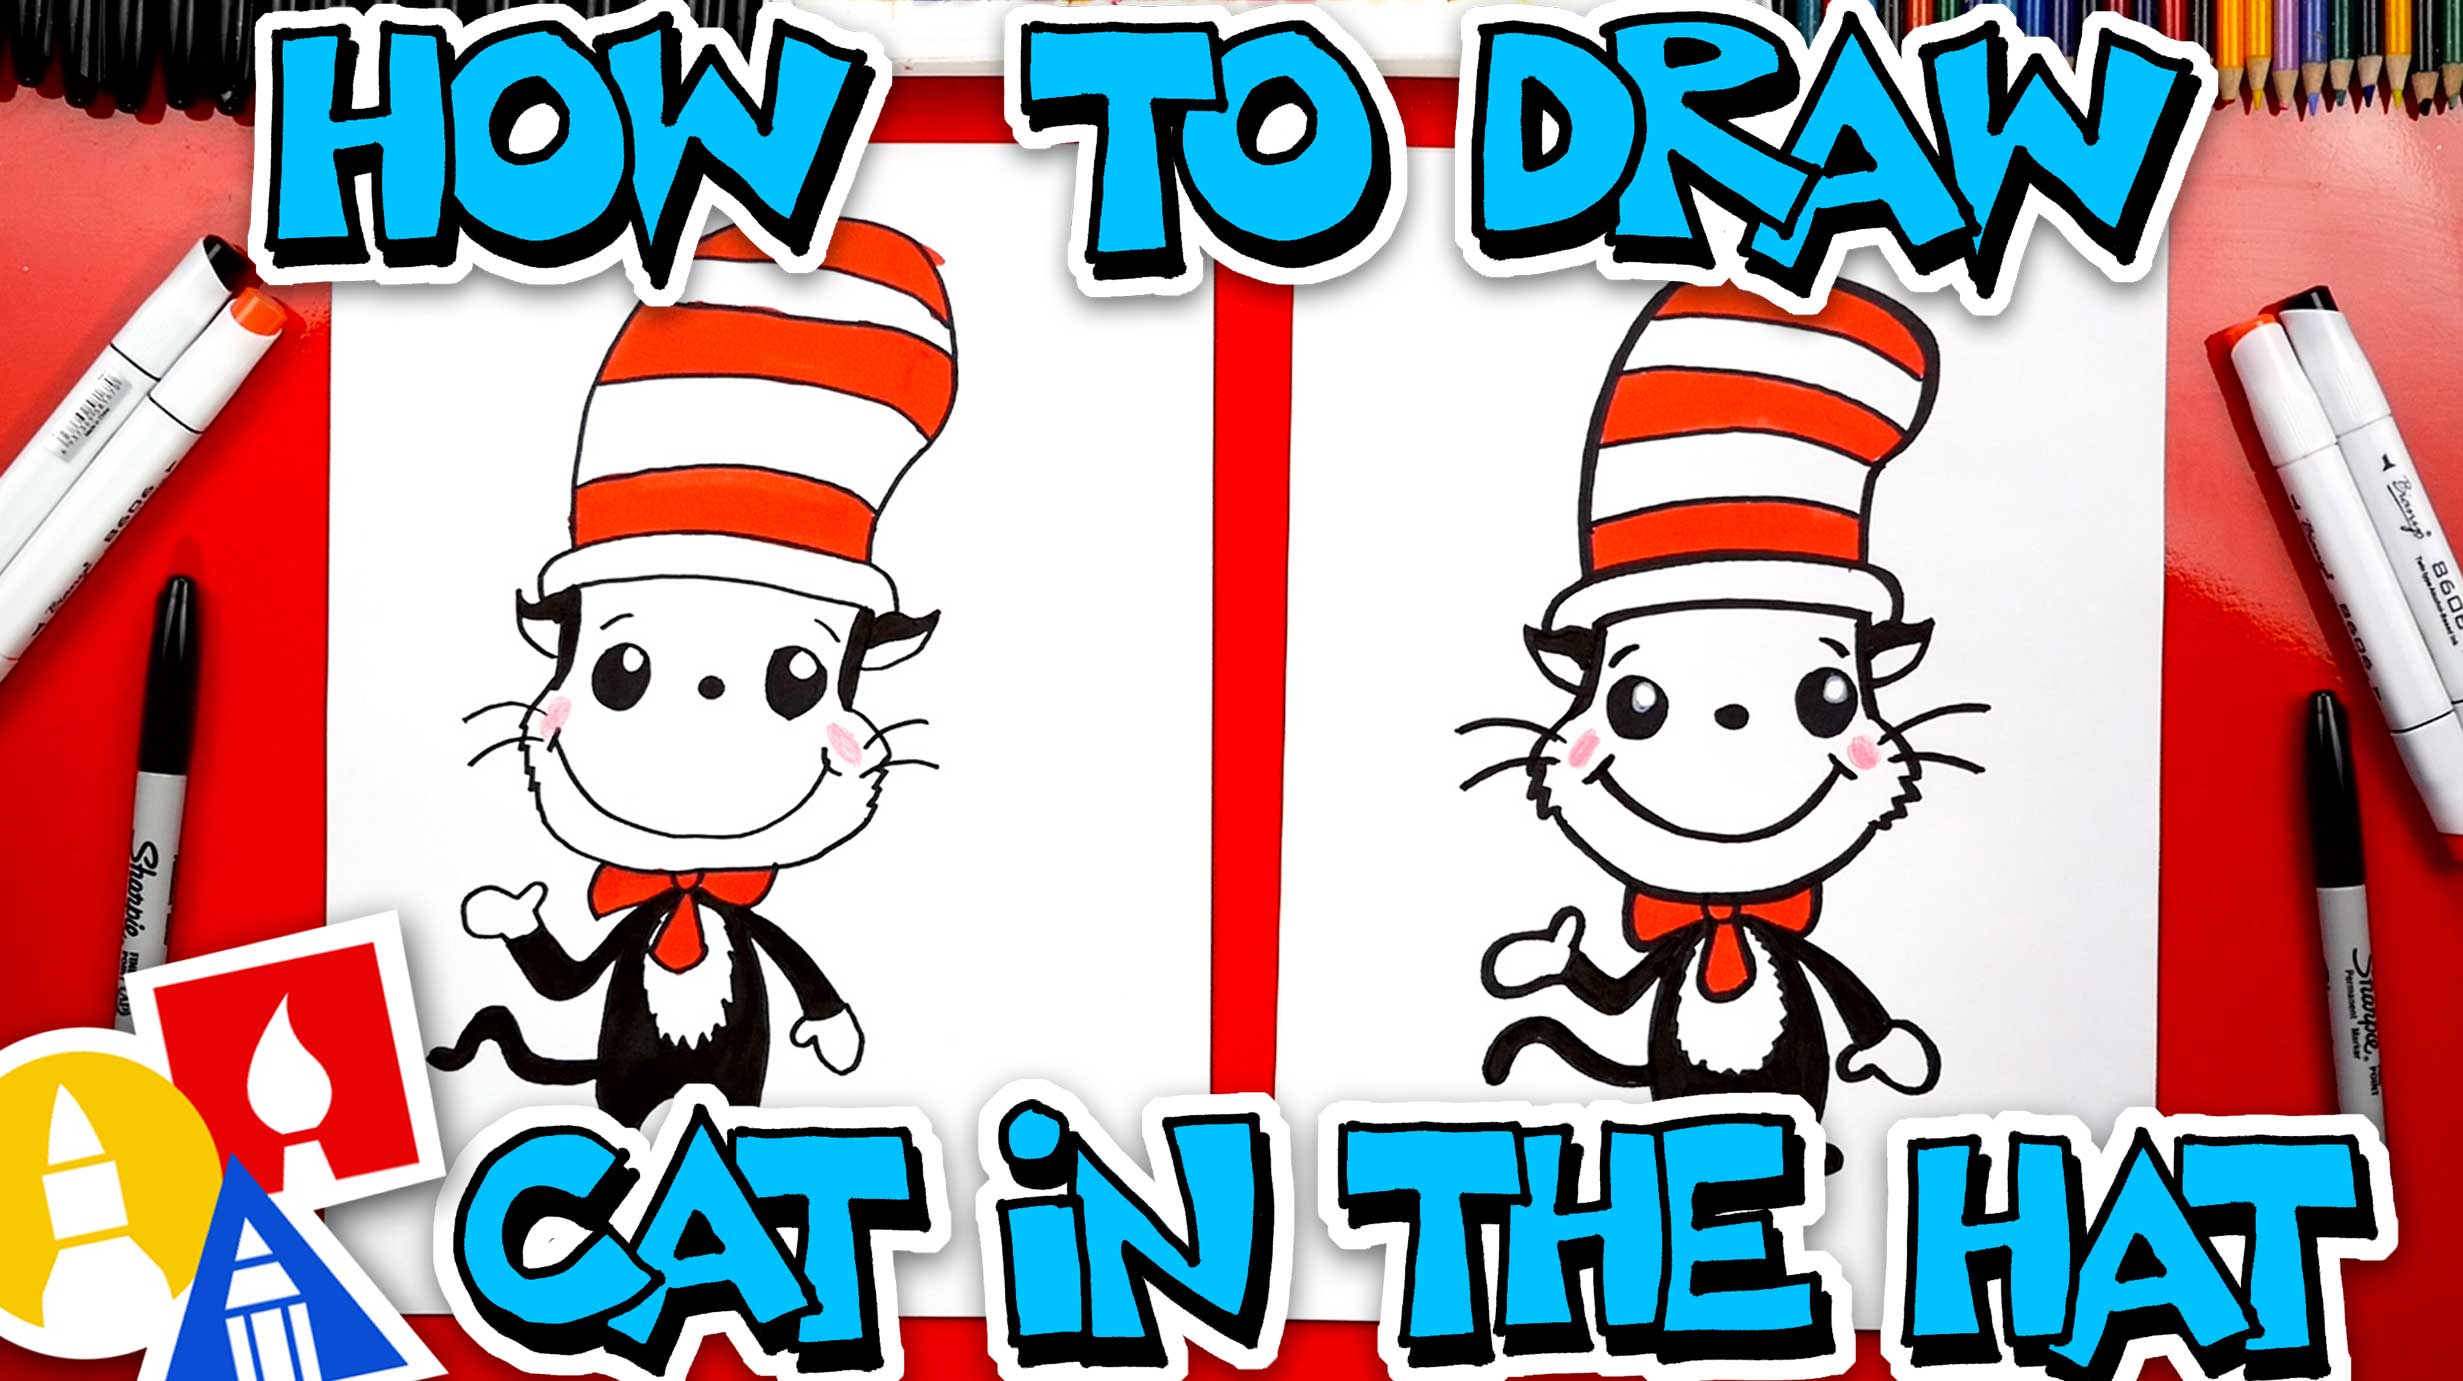 How To Draw The Cat In The Hat (Easy Cartoon Version) - Art For Kids Hub